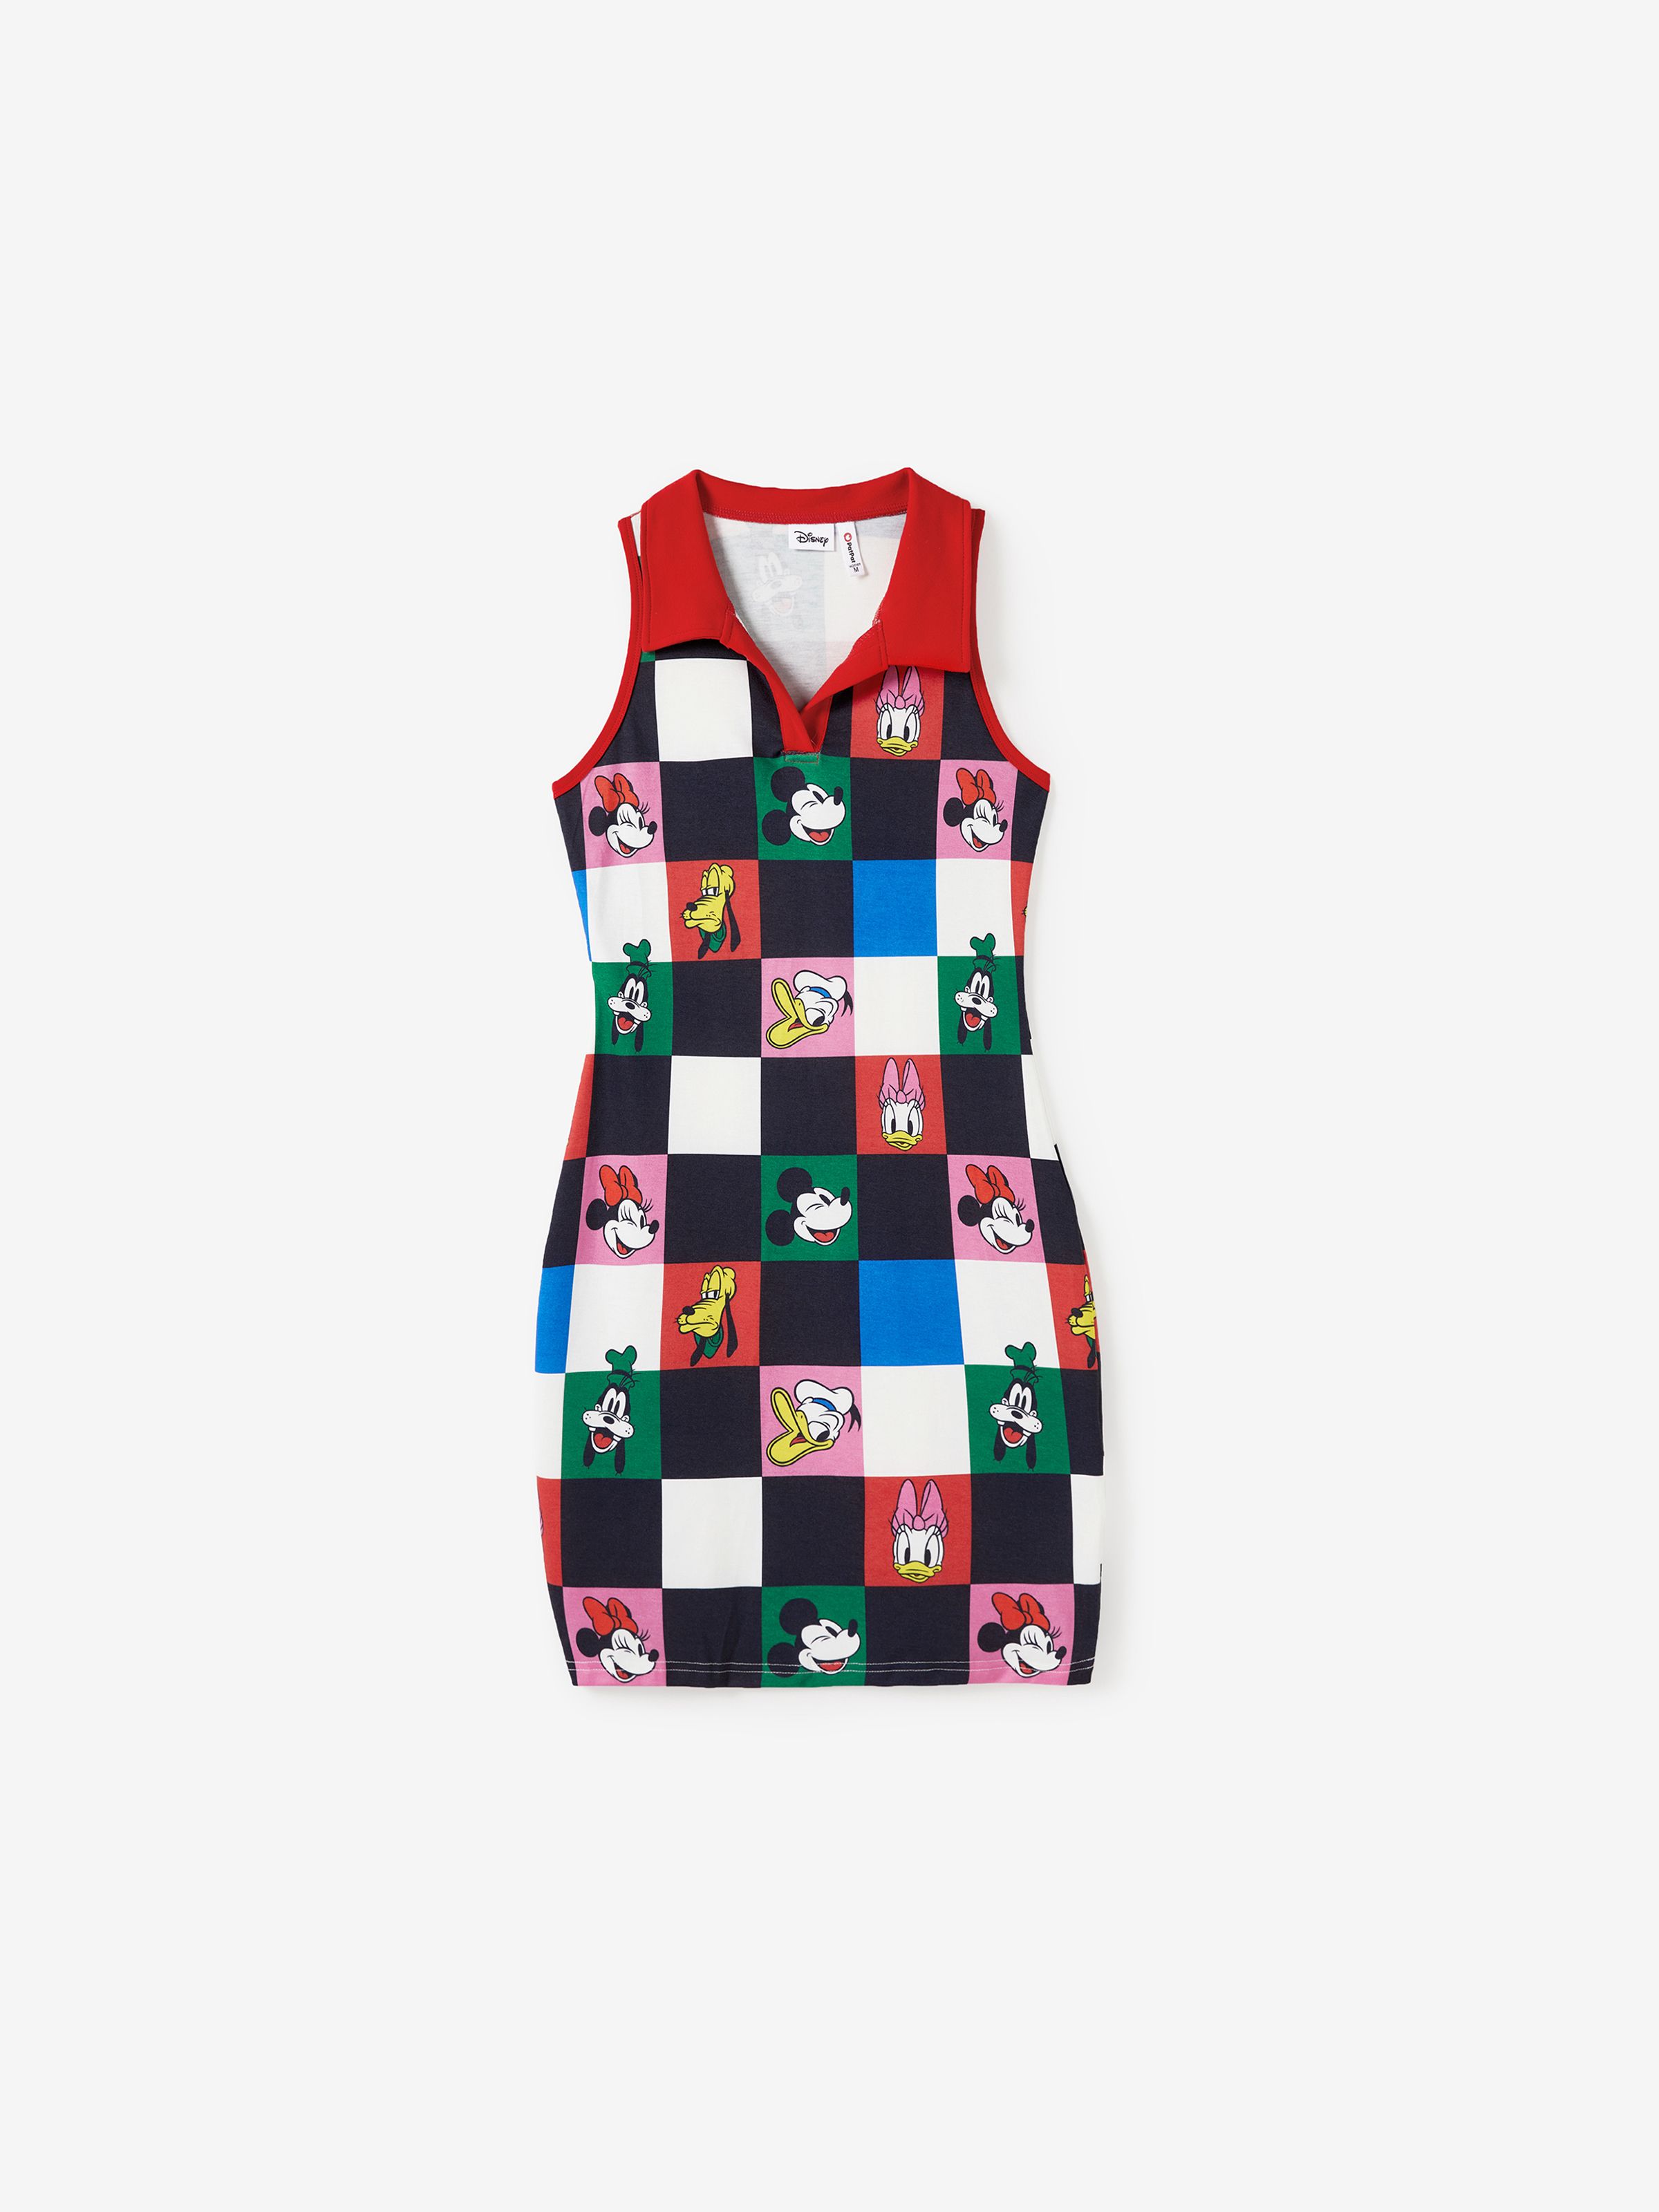 

Disney Mickey and Friends Family Matching Naia™ Colorful Checkered Pattern Top/Sleeveless Dress/Onesie